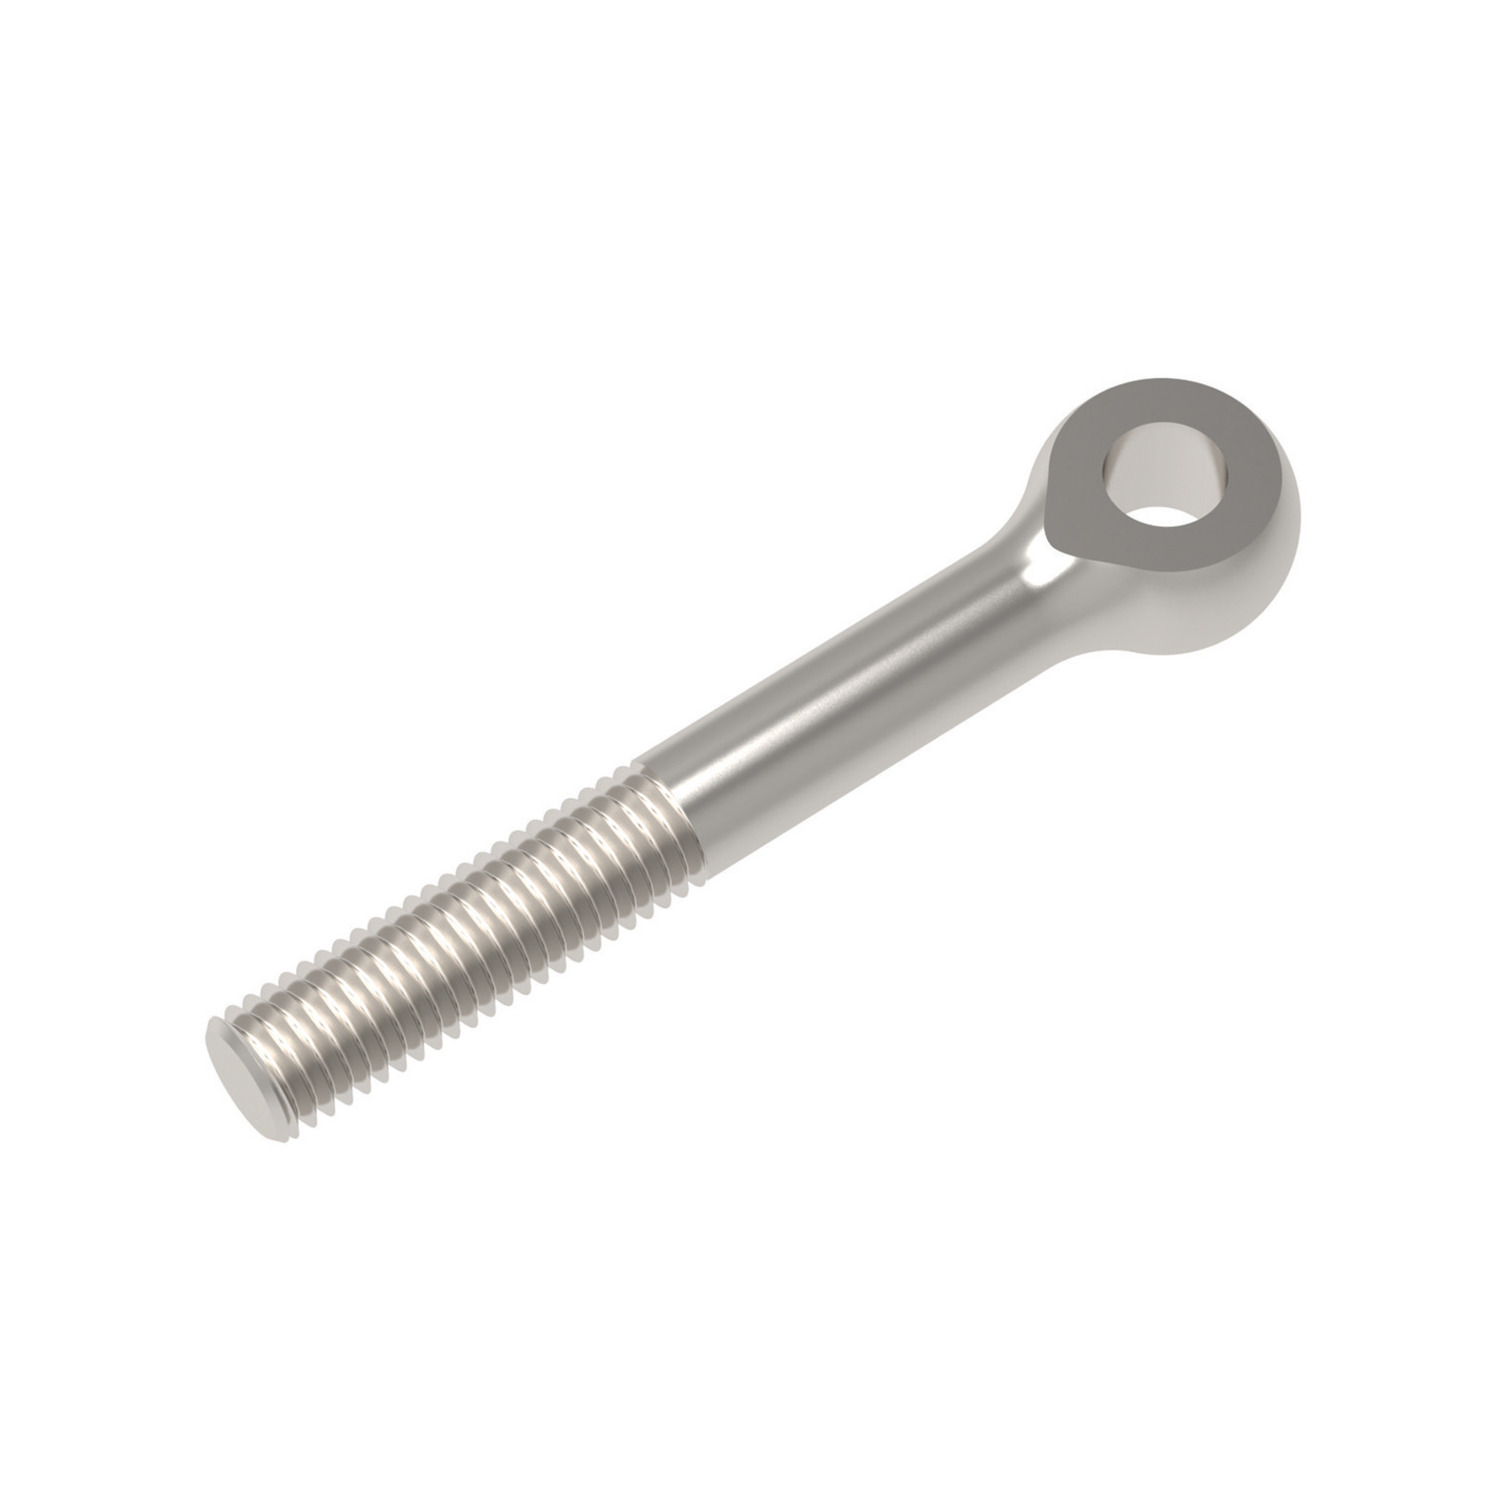 Product 18830, Stainless Swing Bolts high tolerance / 